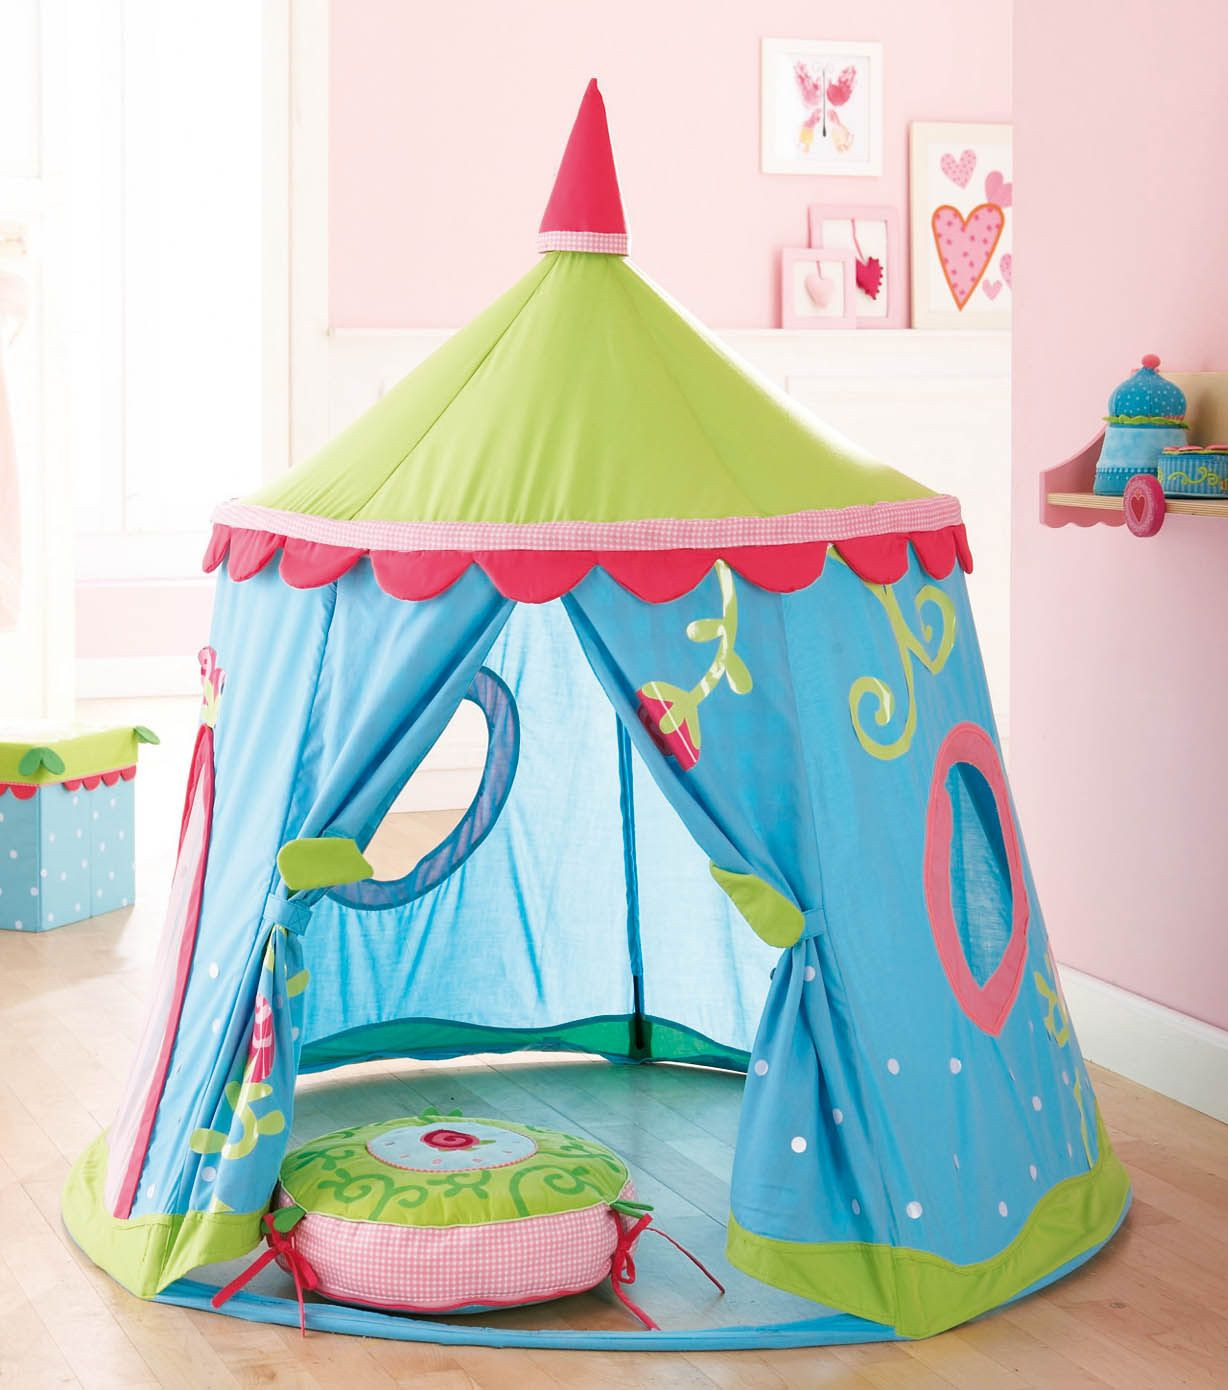 Kids Indoor Play Tent
 Play Tent Girls & Holo Kids Play Tents Girl Child Children